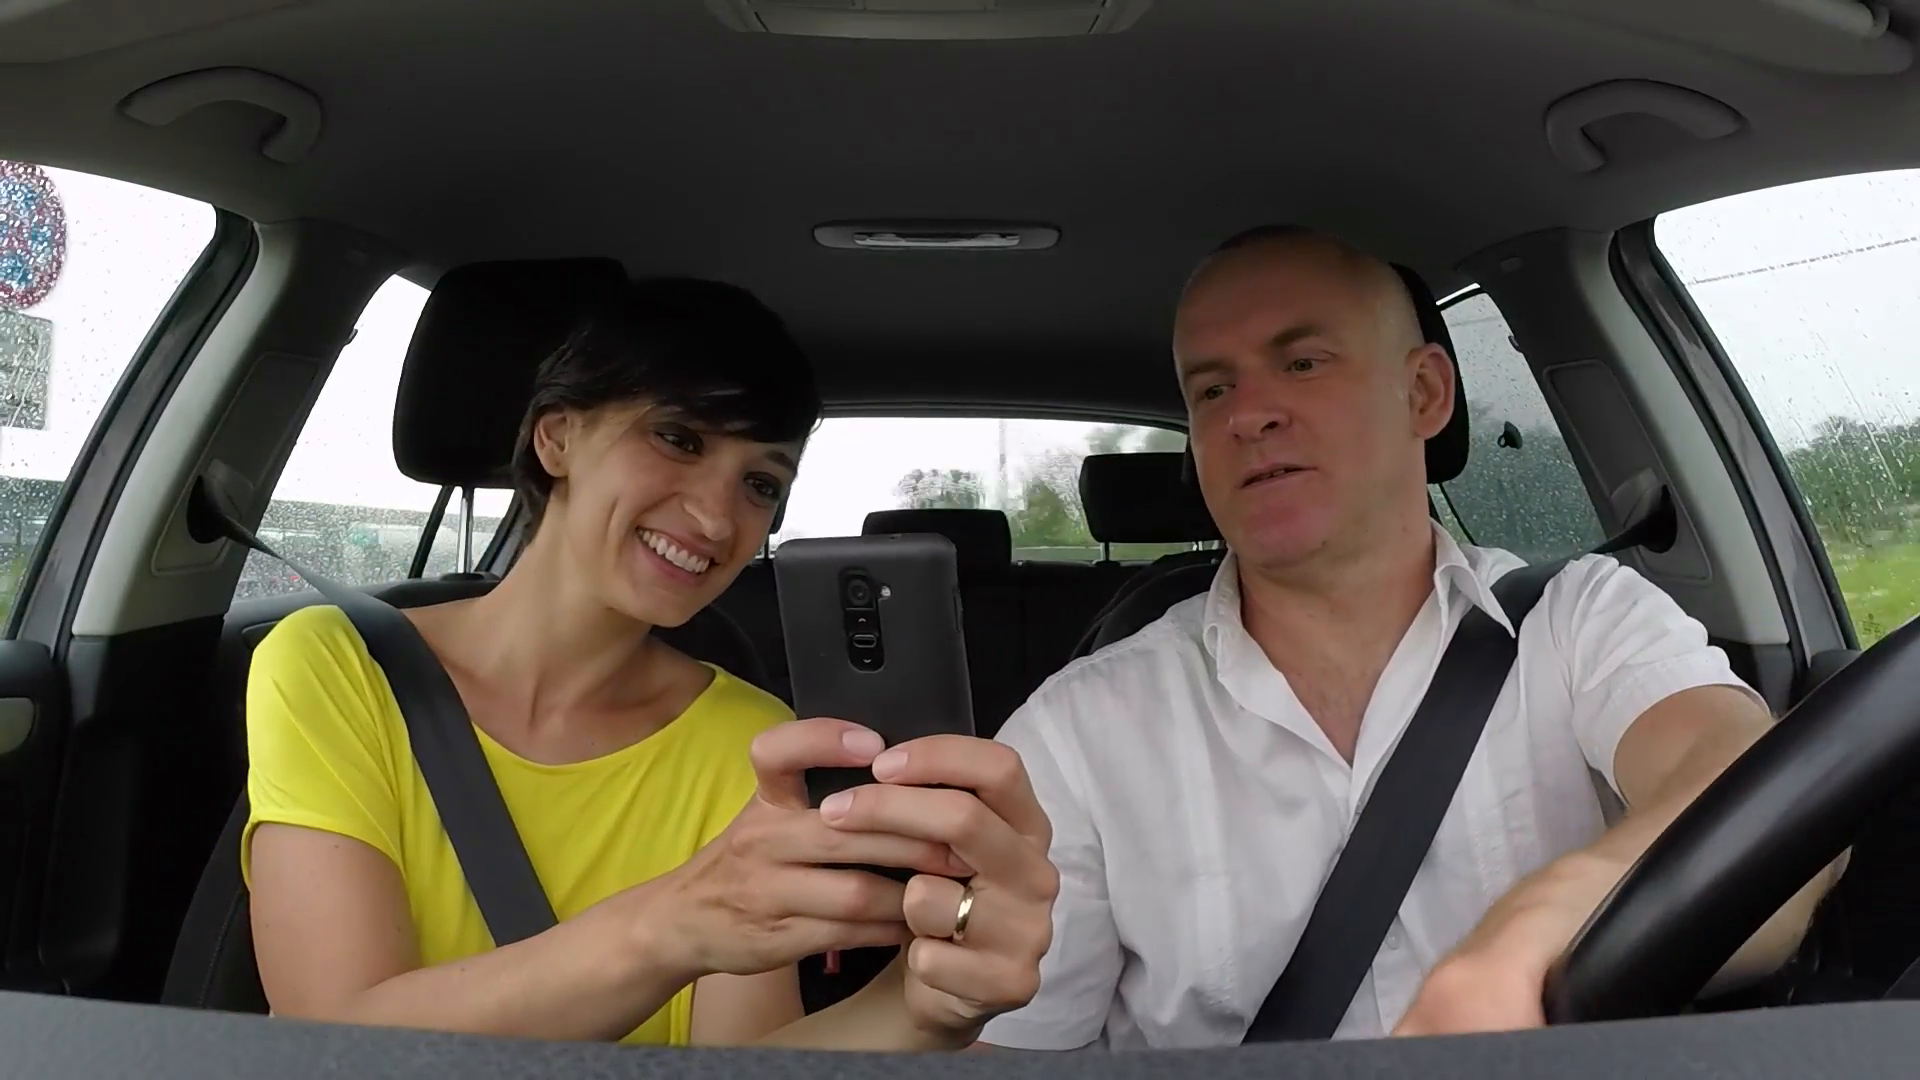 married-white-couple-on-road-trip-happy-people-traveling-by-car-on-the-street-man-driving-vehicle-with-woman-cheerful-husband-and-wife-playing-pokemon-go-with-smartphone_savvhkdo__F0008